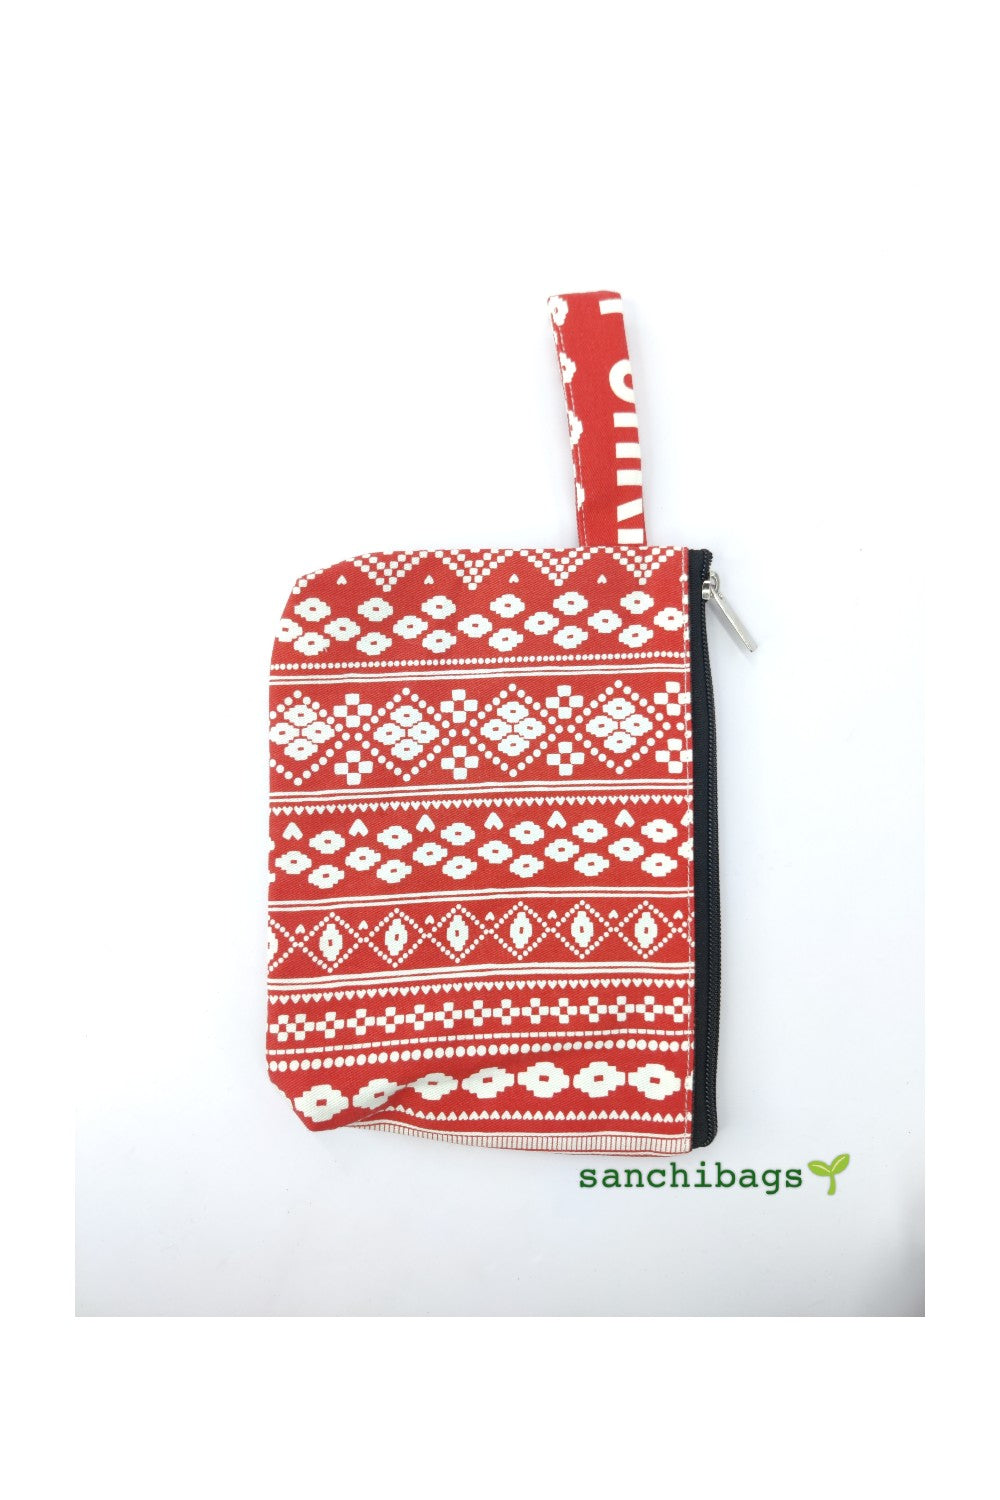 Buy SANCHI Bags Jute and Cotton ECO - Friendly Multicolour School Bag with  Laptop Compartment at Amazon.in